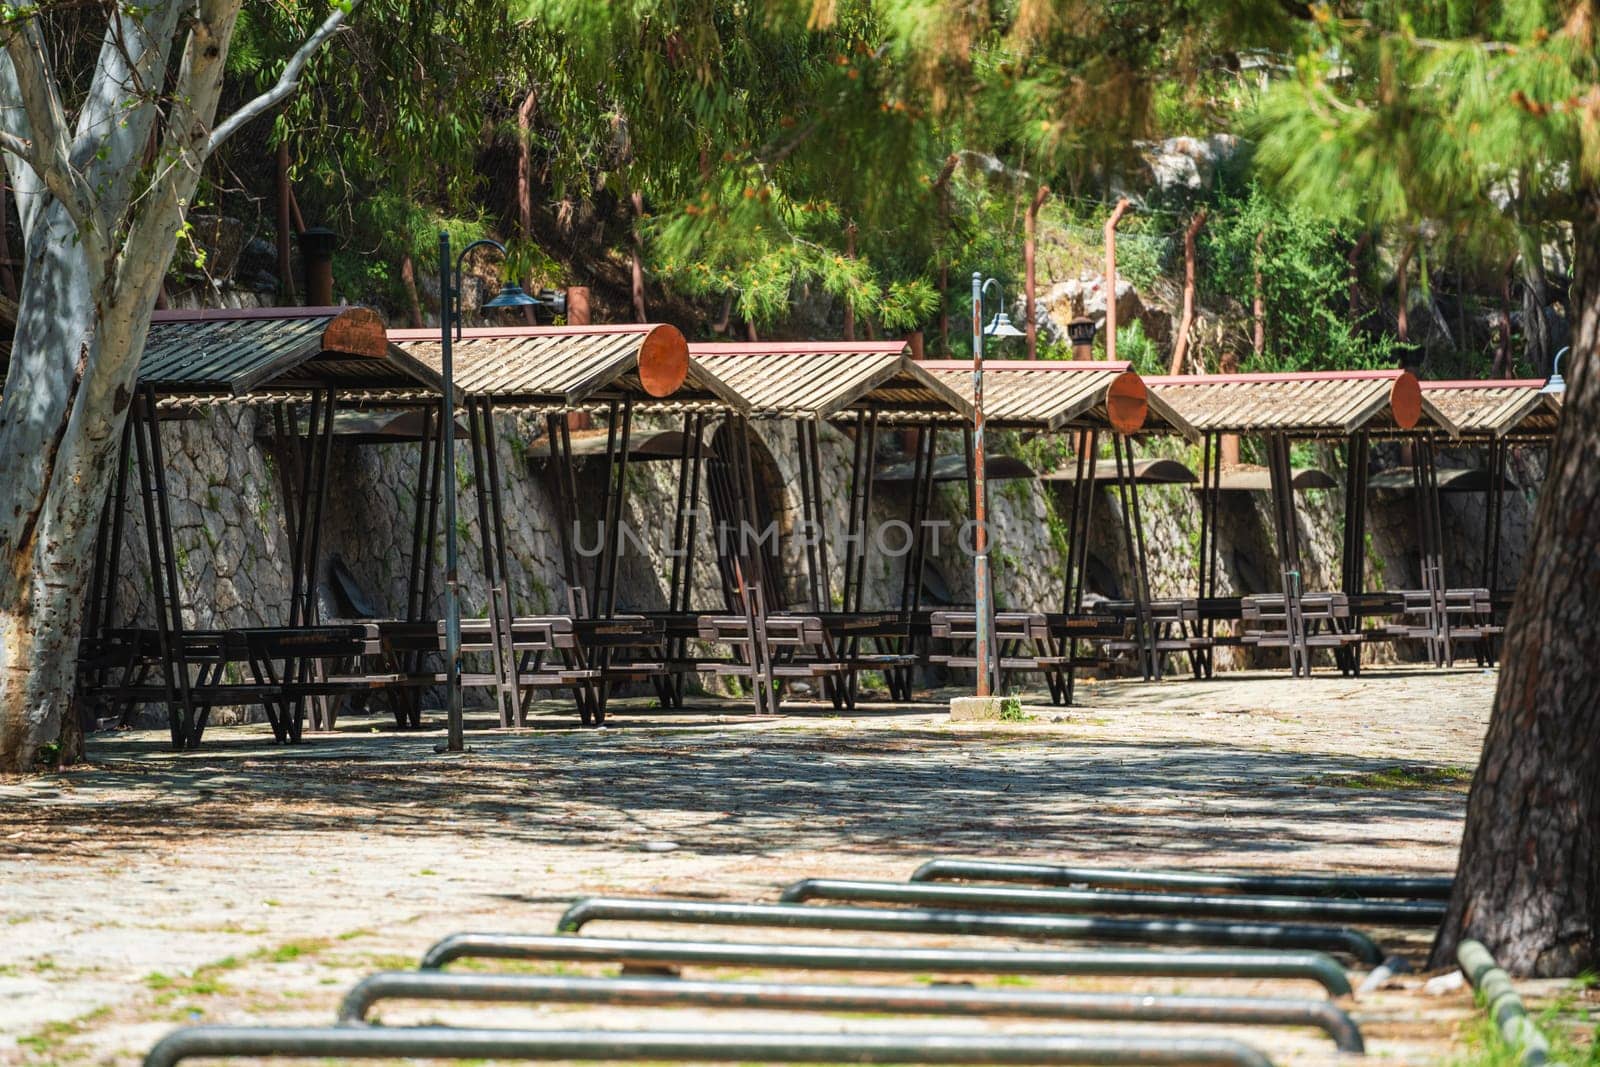 Topcam picnic area by the sea in Antalya, Turkey by Sonat